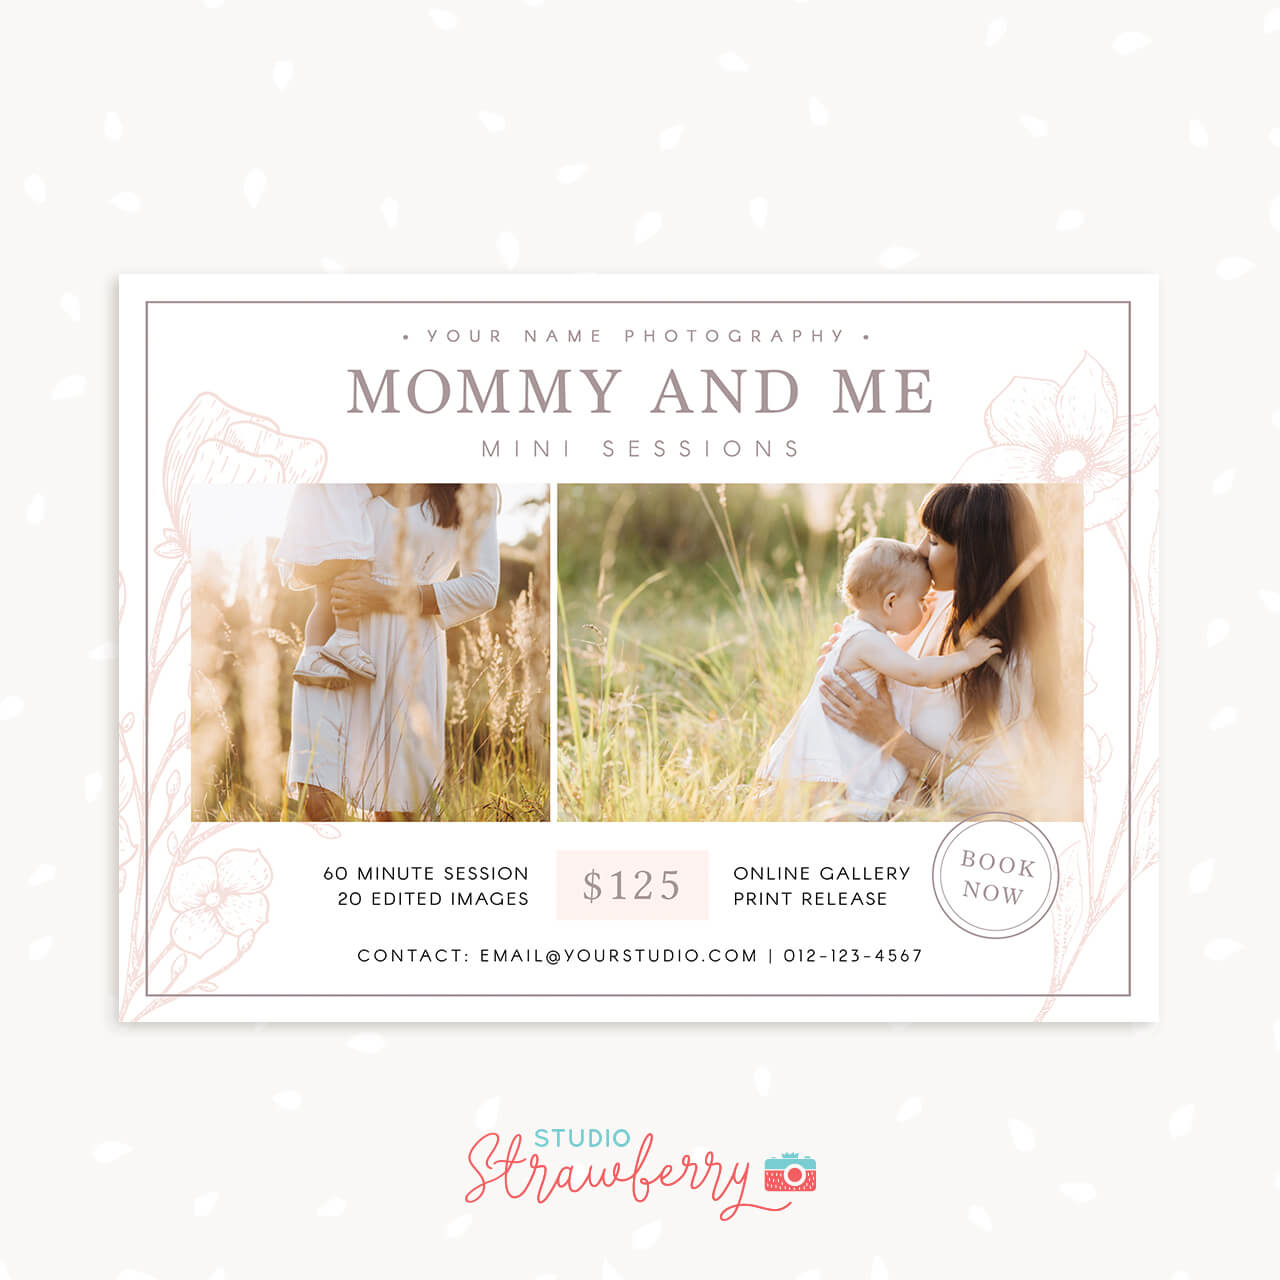 Mommy and me mini sessions template minimal